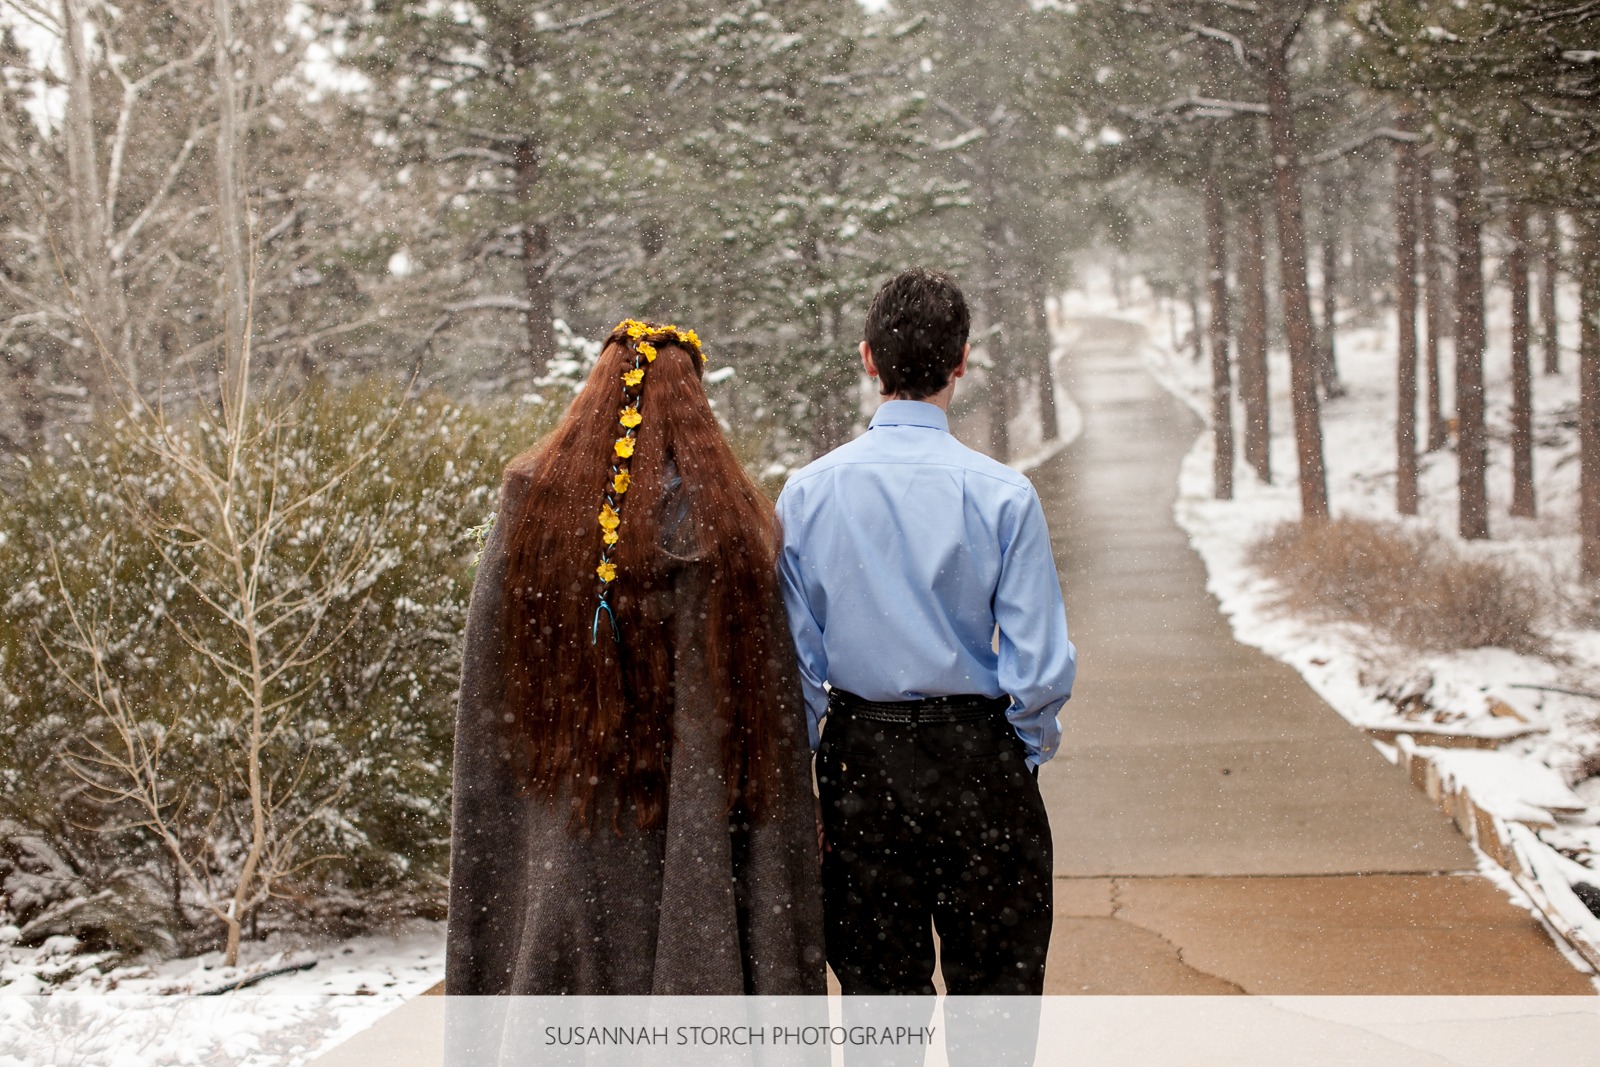 a woman with flowers in her hair walks down a concrete path in the snow